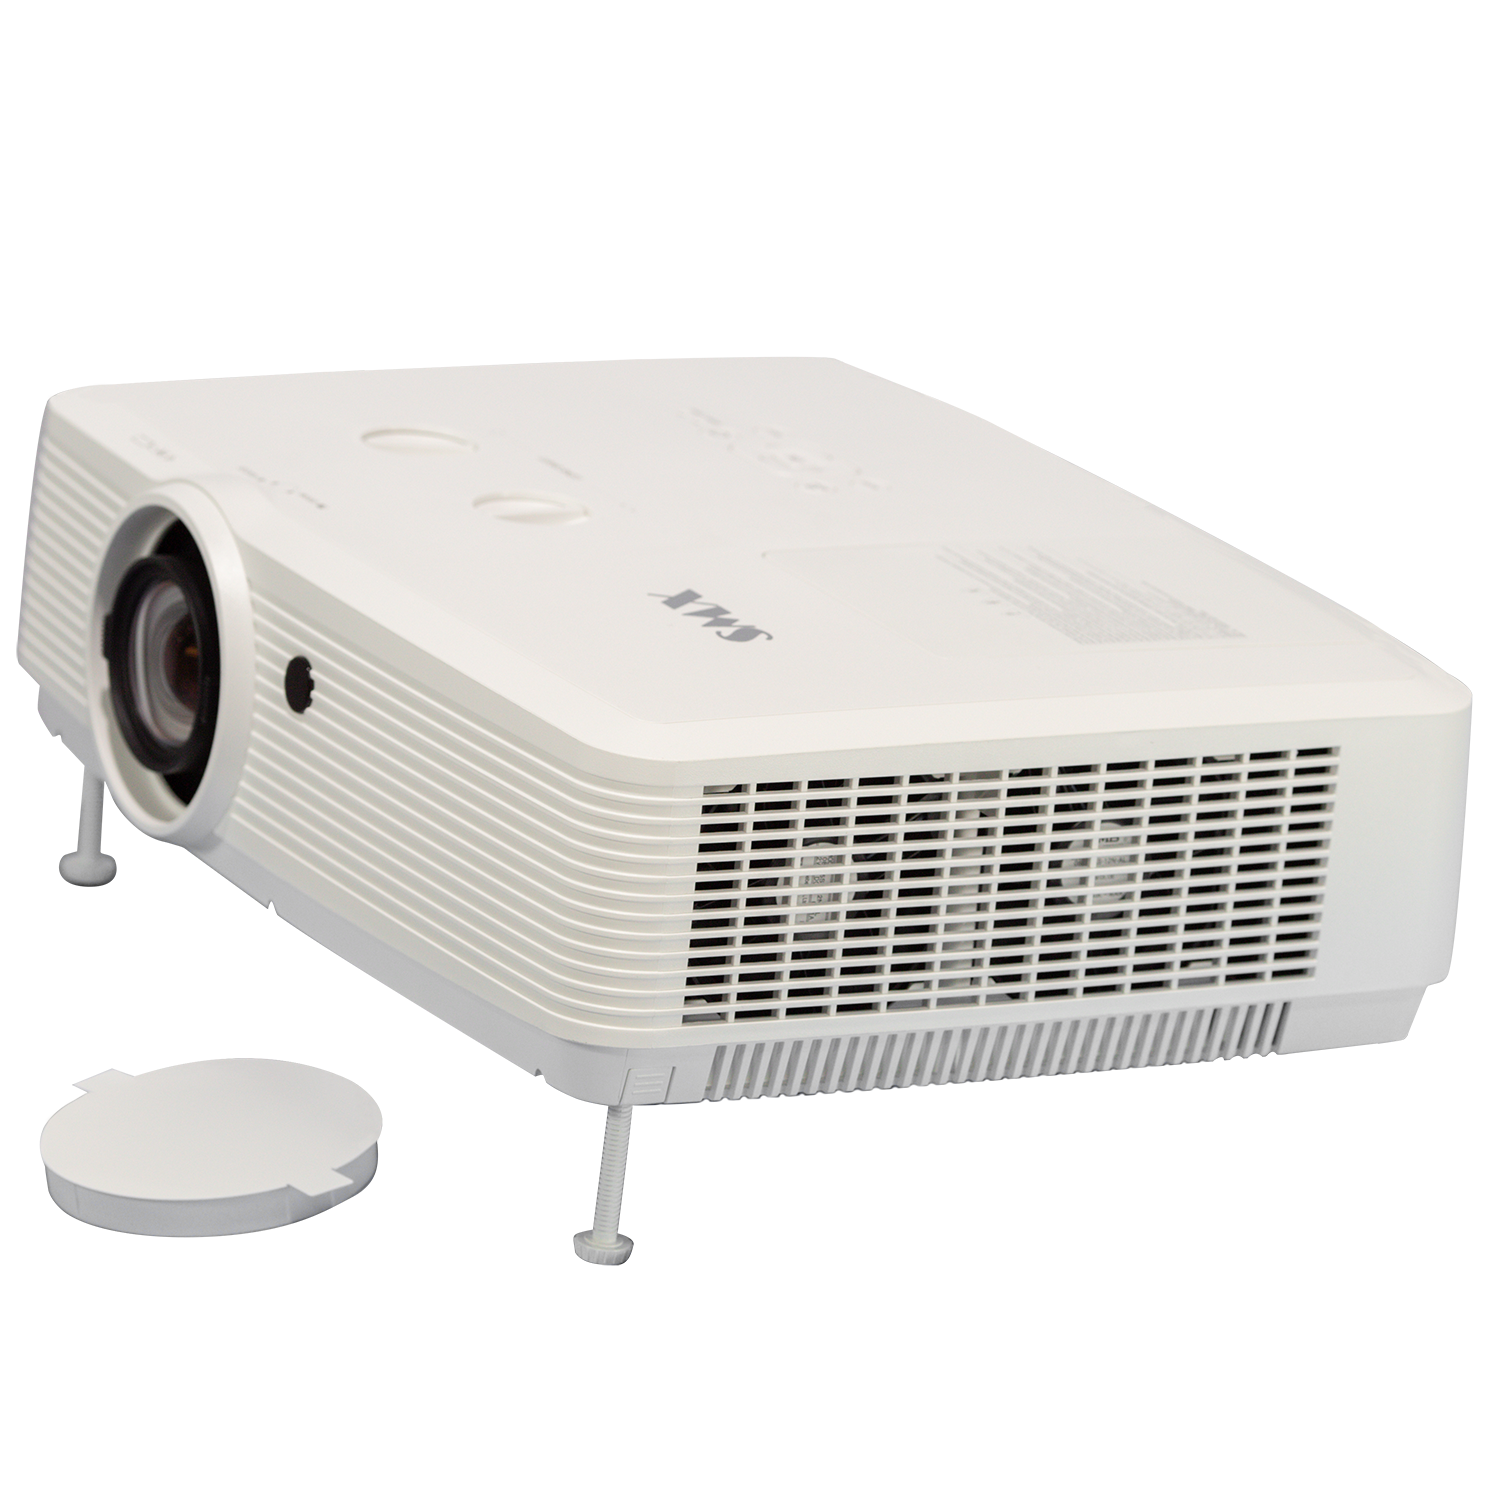 SMX MX-L550U 5500 Lumens WUXGA 3LCD Projector For Meeting Room Game with cheap price